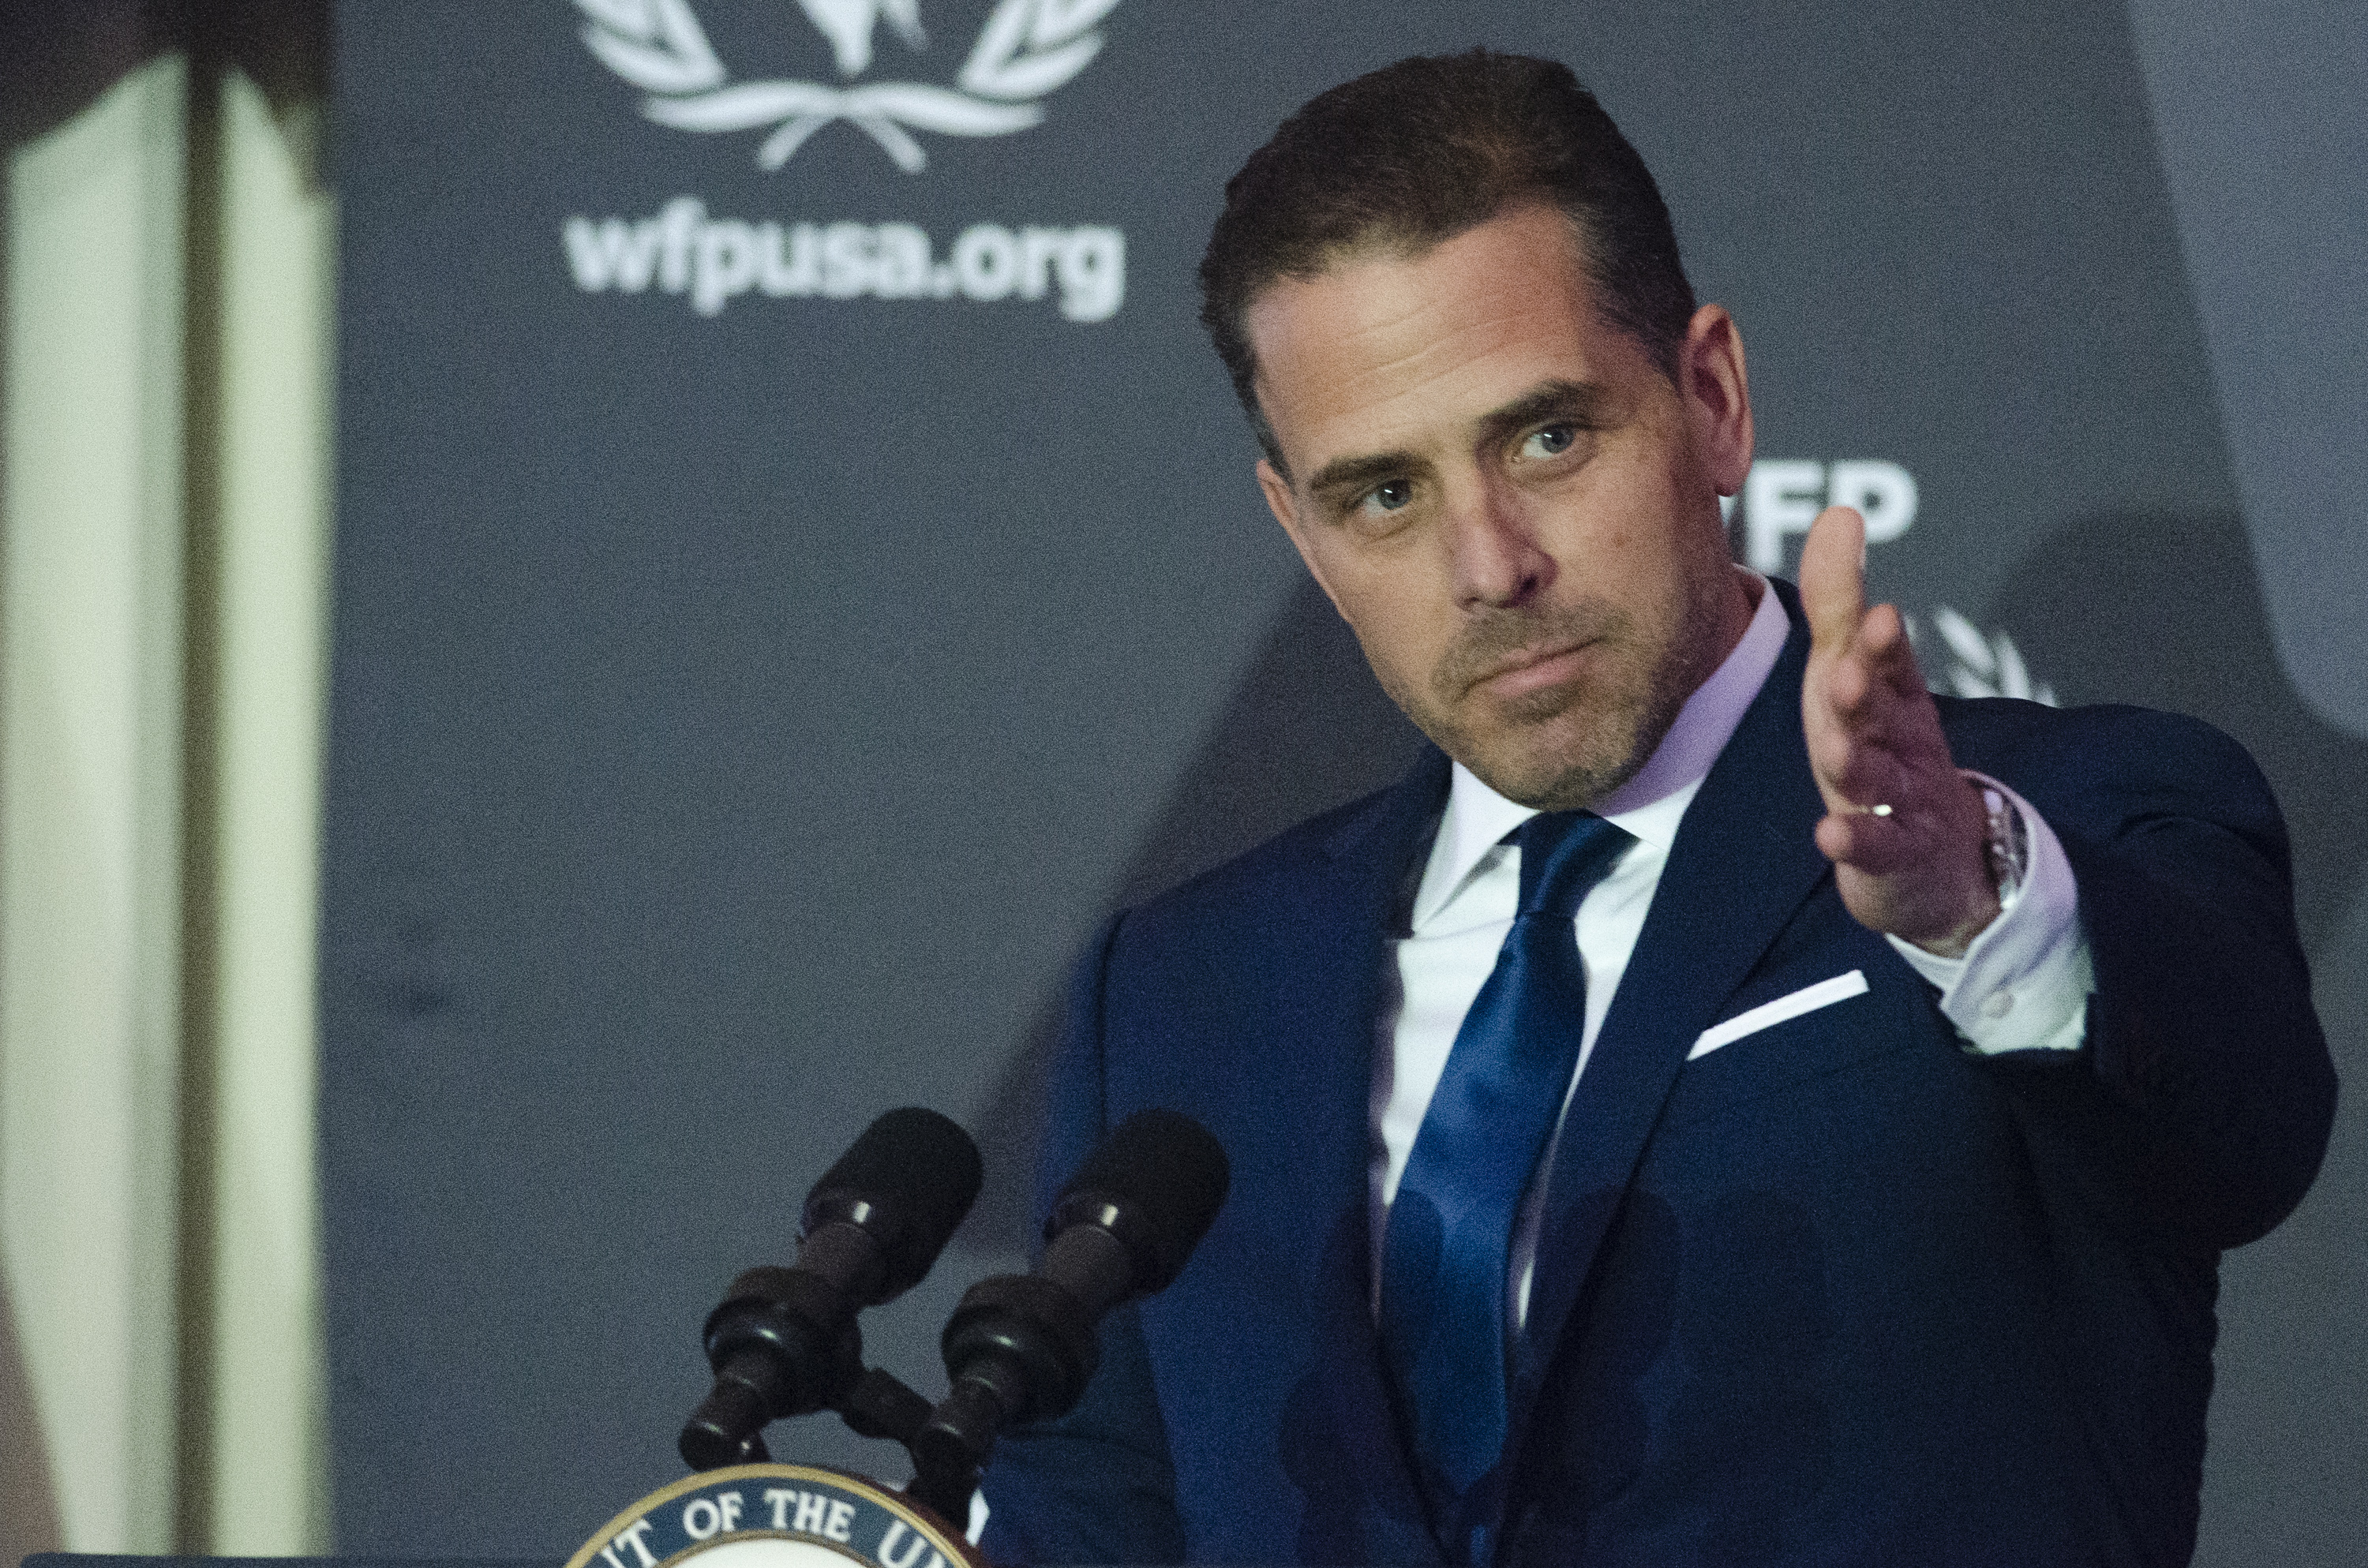 Hunter Biden memories listed as bestsellers in ‘Chinese Biographies’ on Amazon